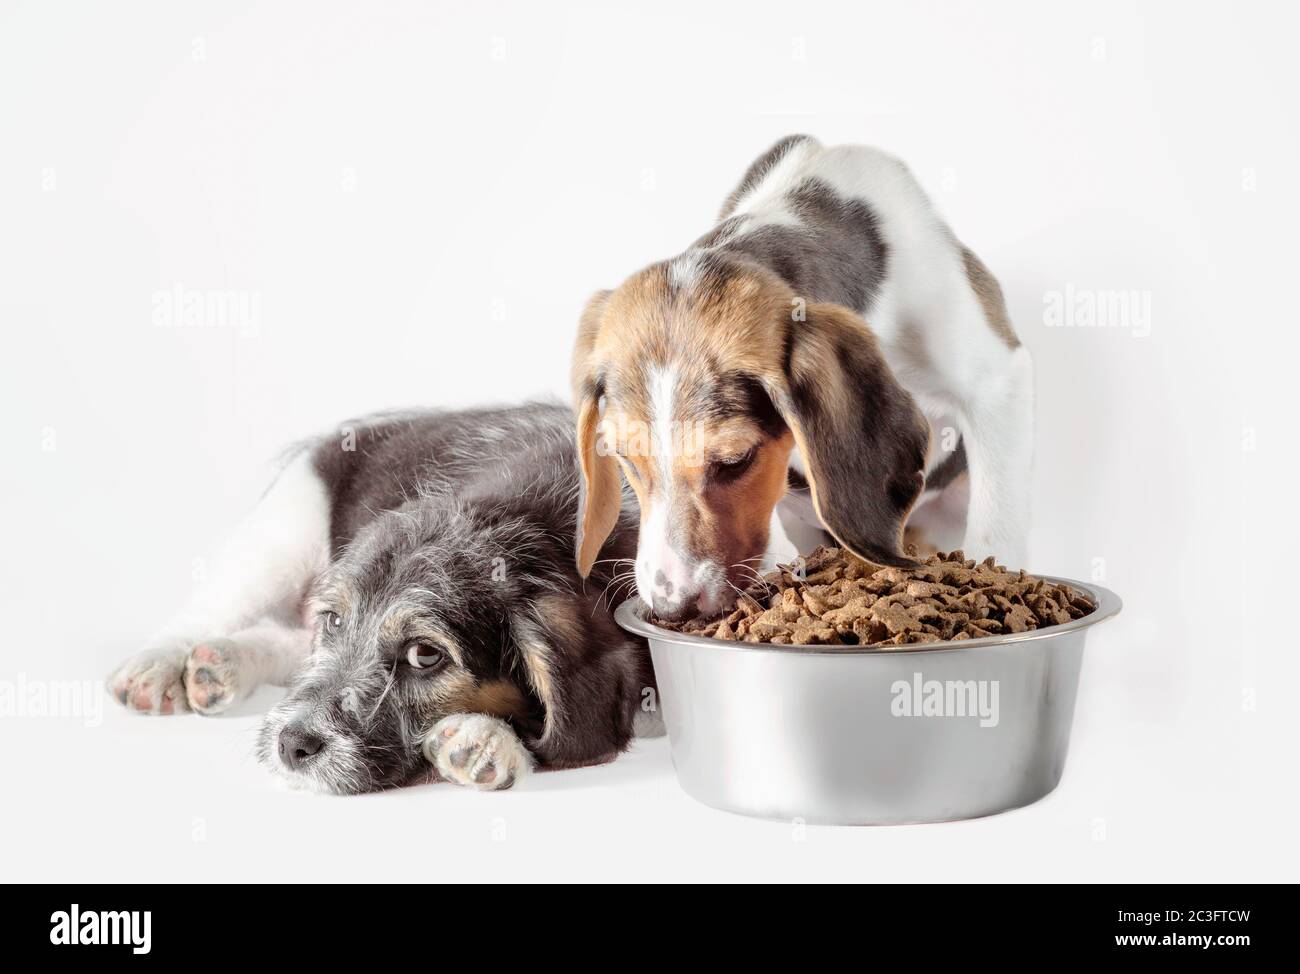 shaggy puppy mongrel with a bowl of dry food Stock Photo